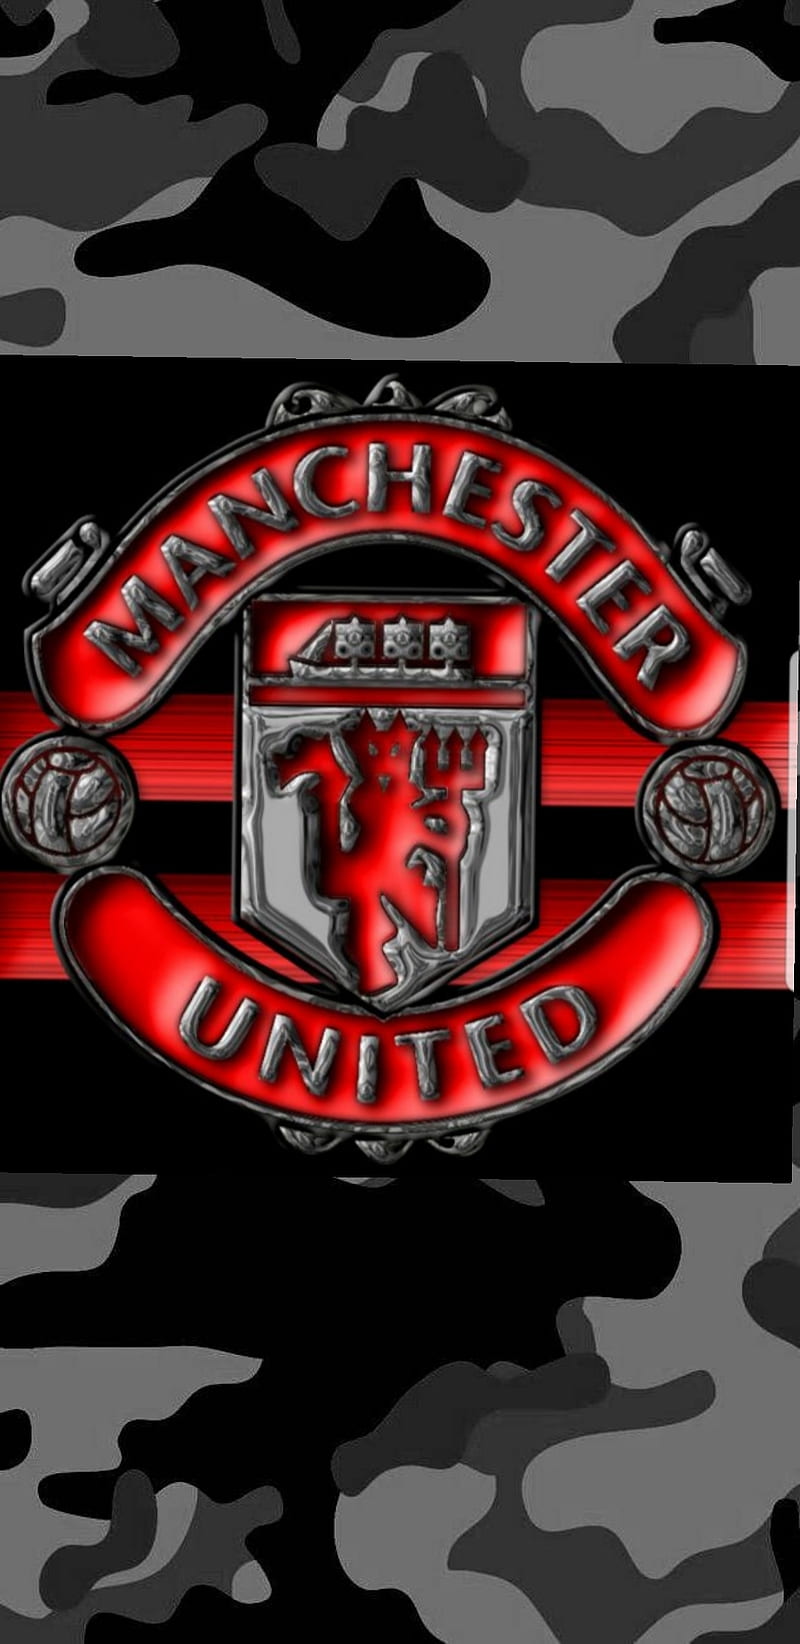 Manchester United on Twitter A wallpaper for every matchday  MUFC   UCL httpstcoR6Dq3FANjY  Twitter